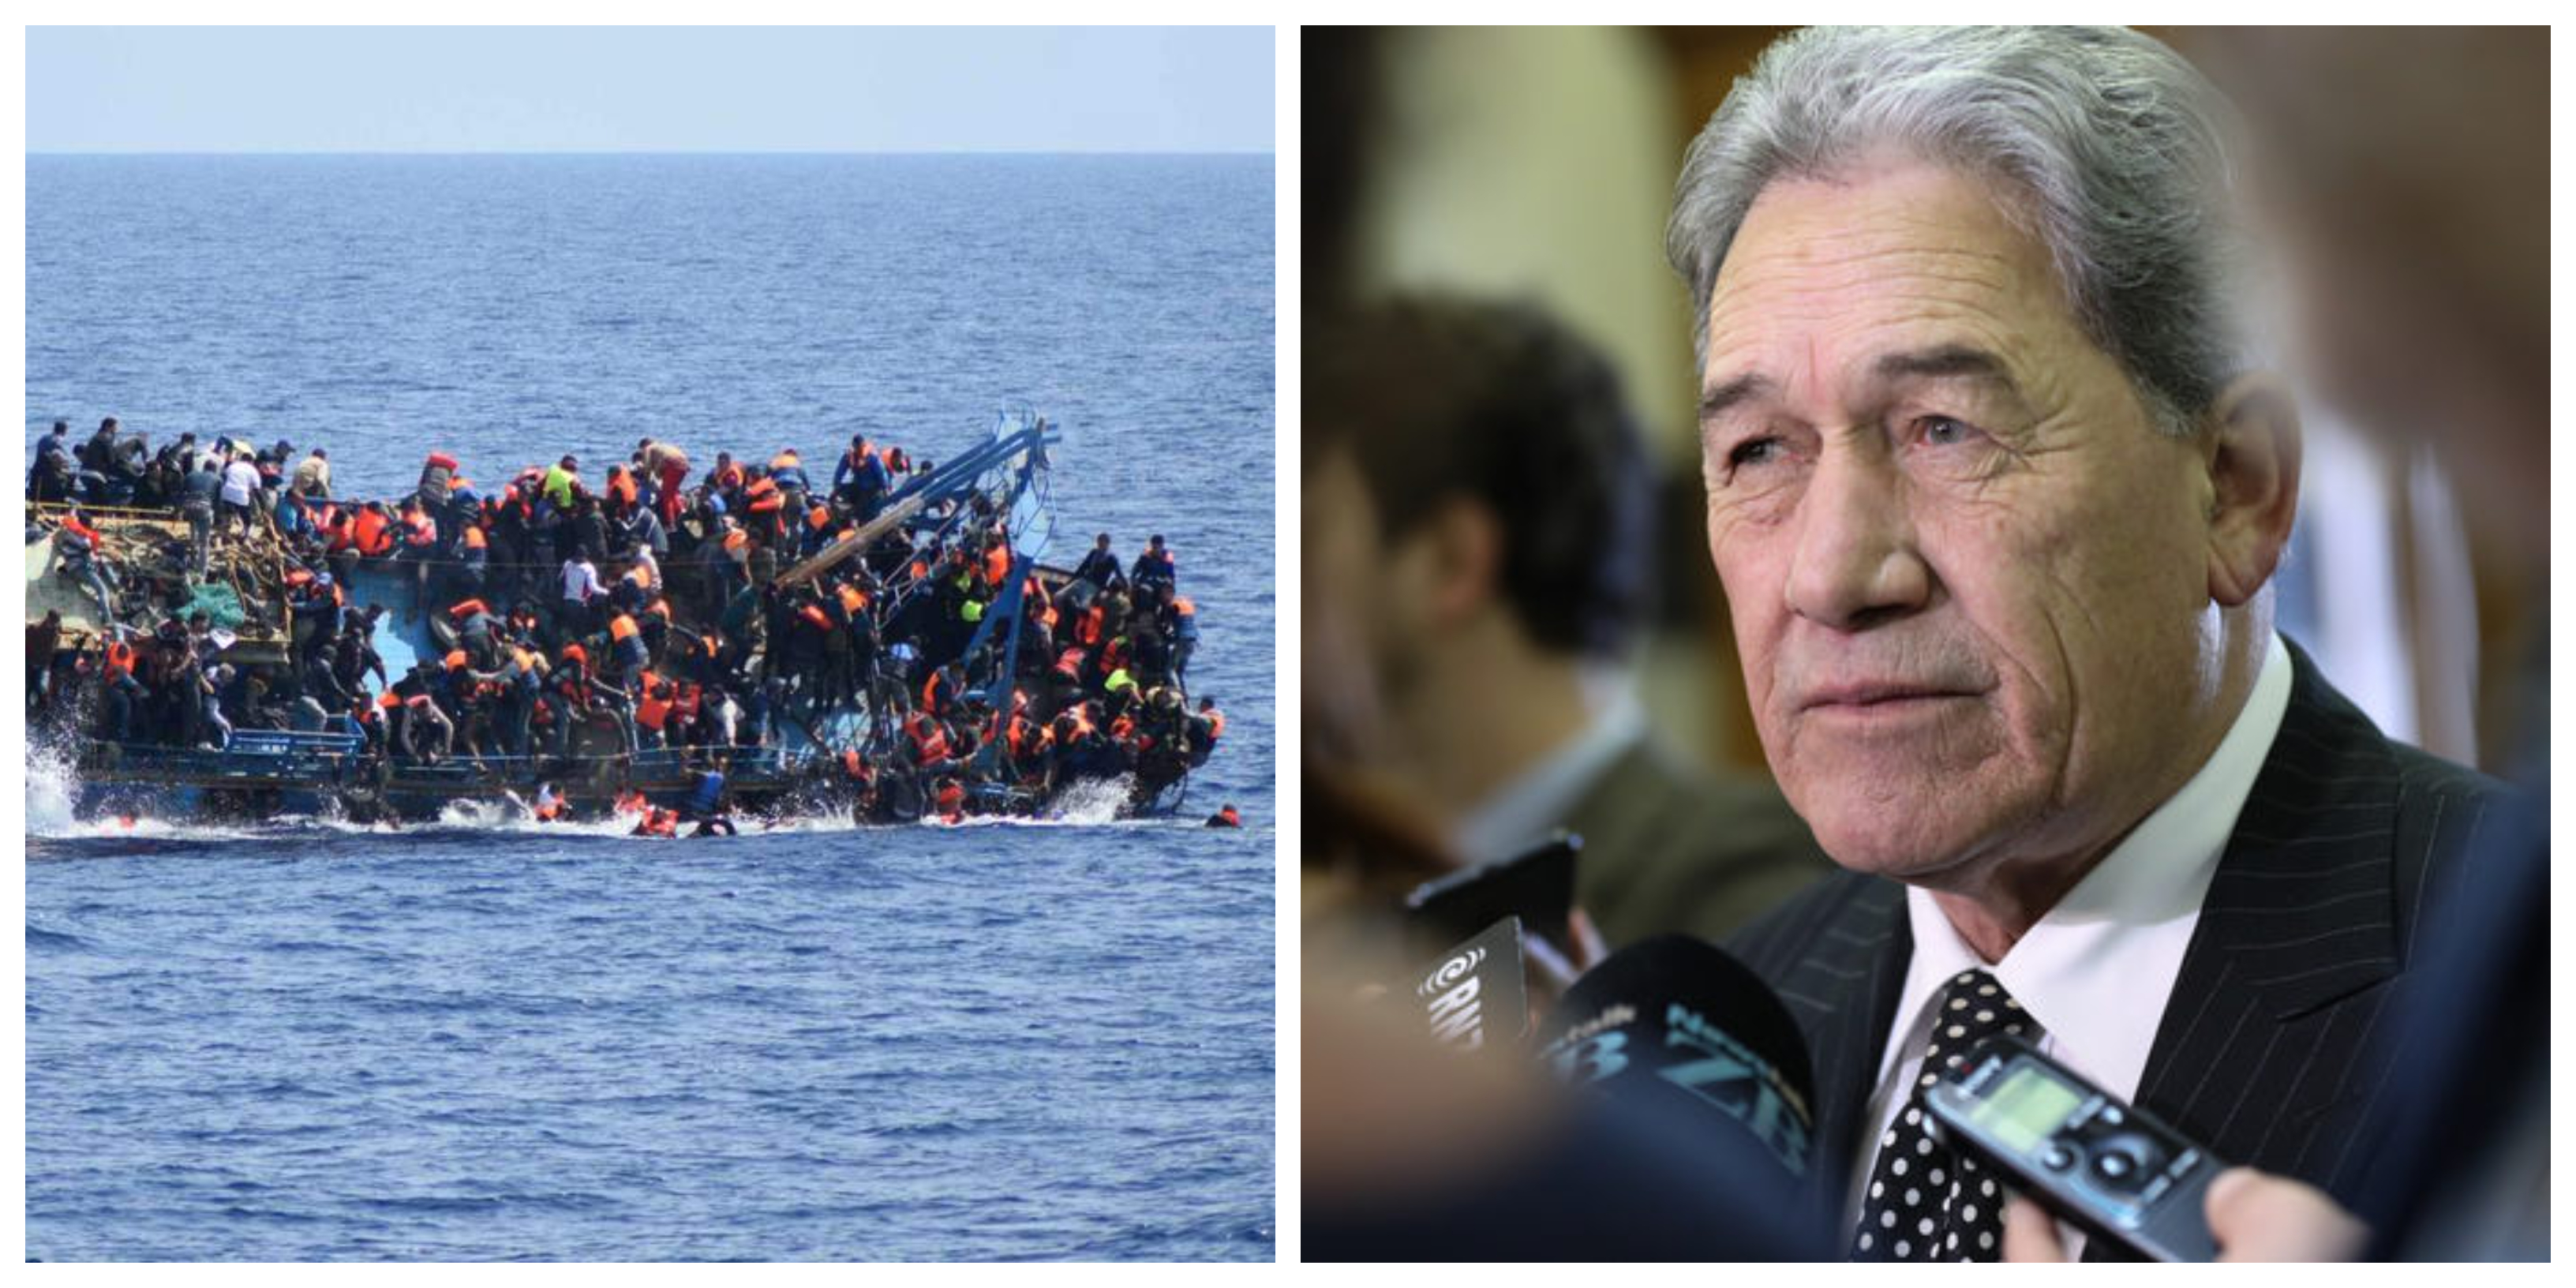 Winston Peters refugee boats